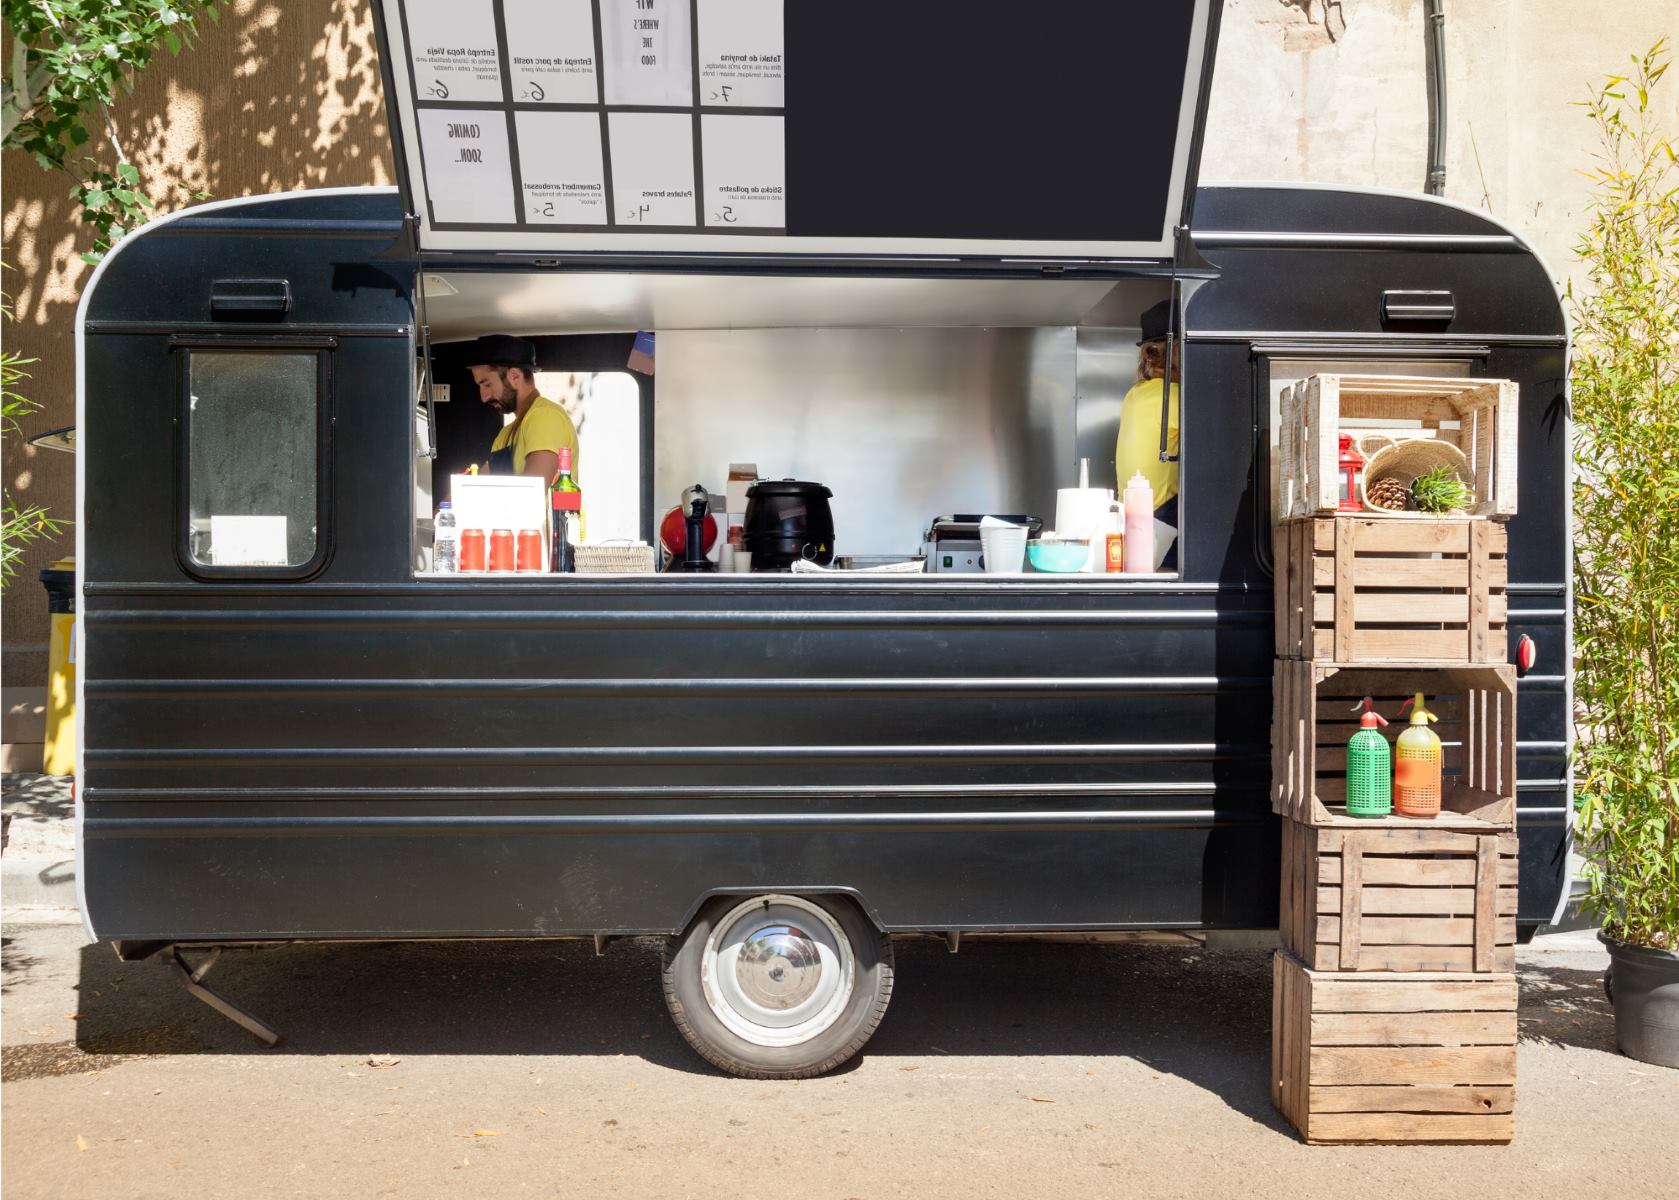 DIY Food Truck: Building Your Own Mobile Kitchen